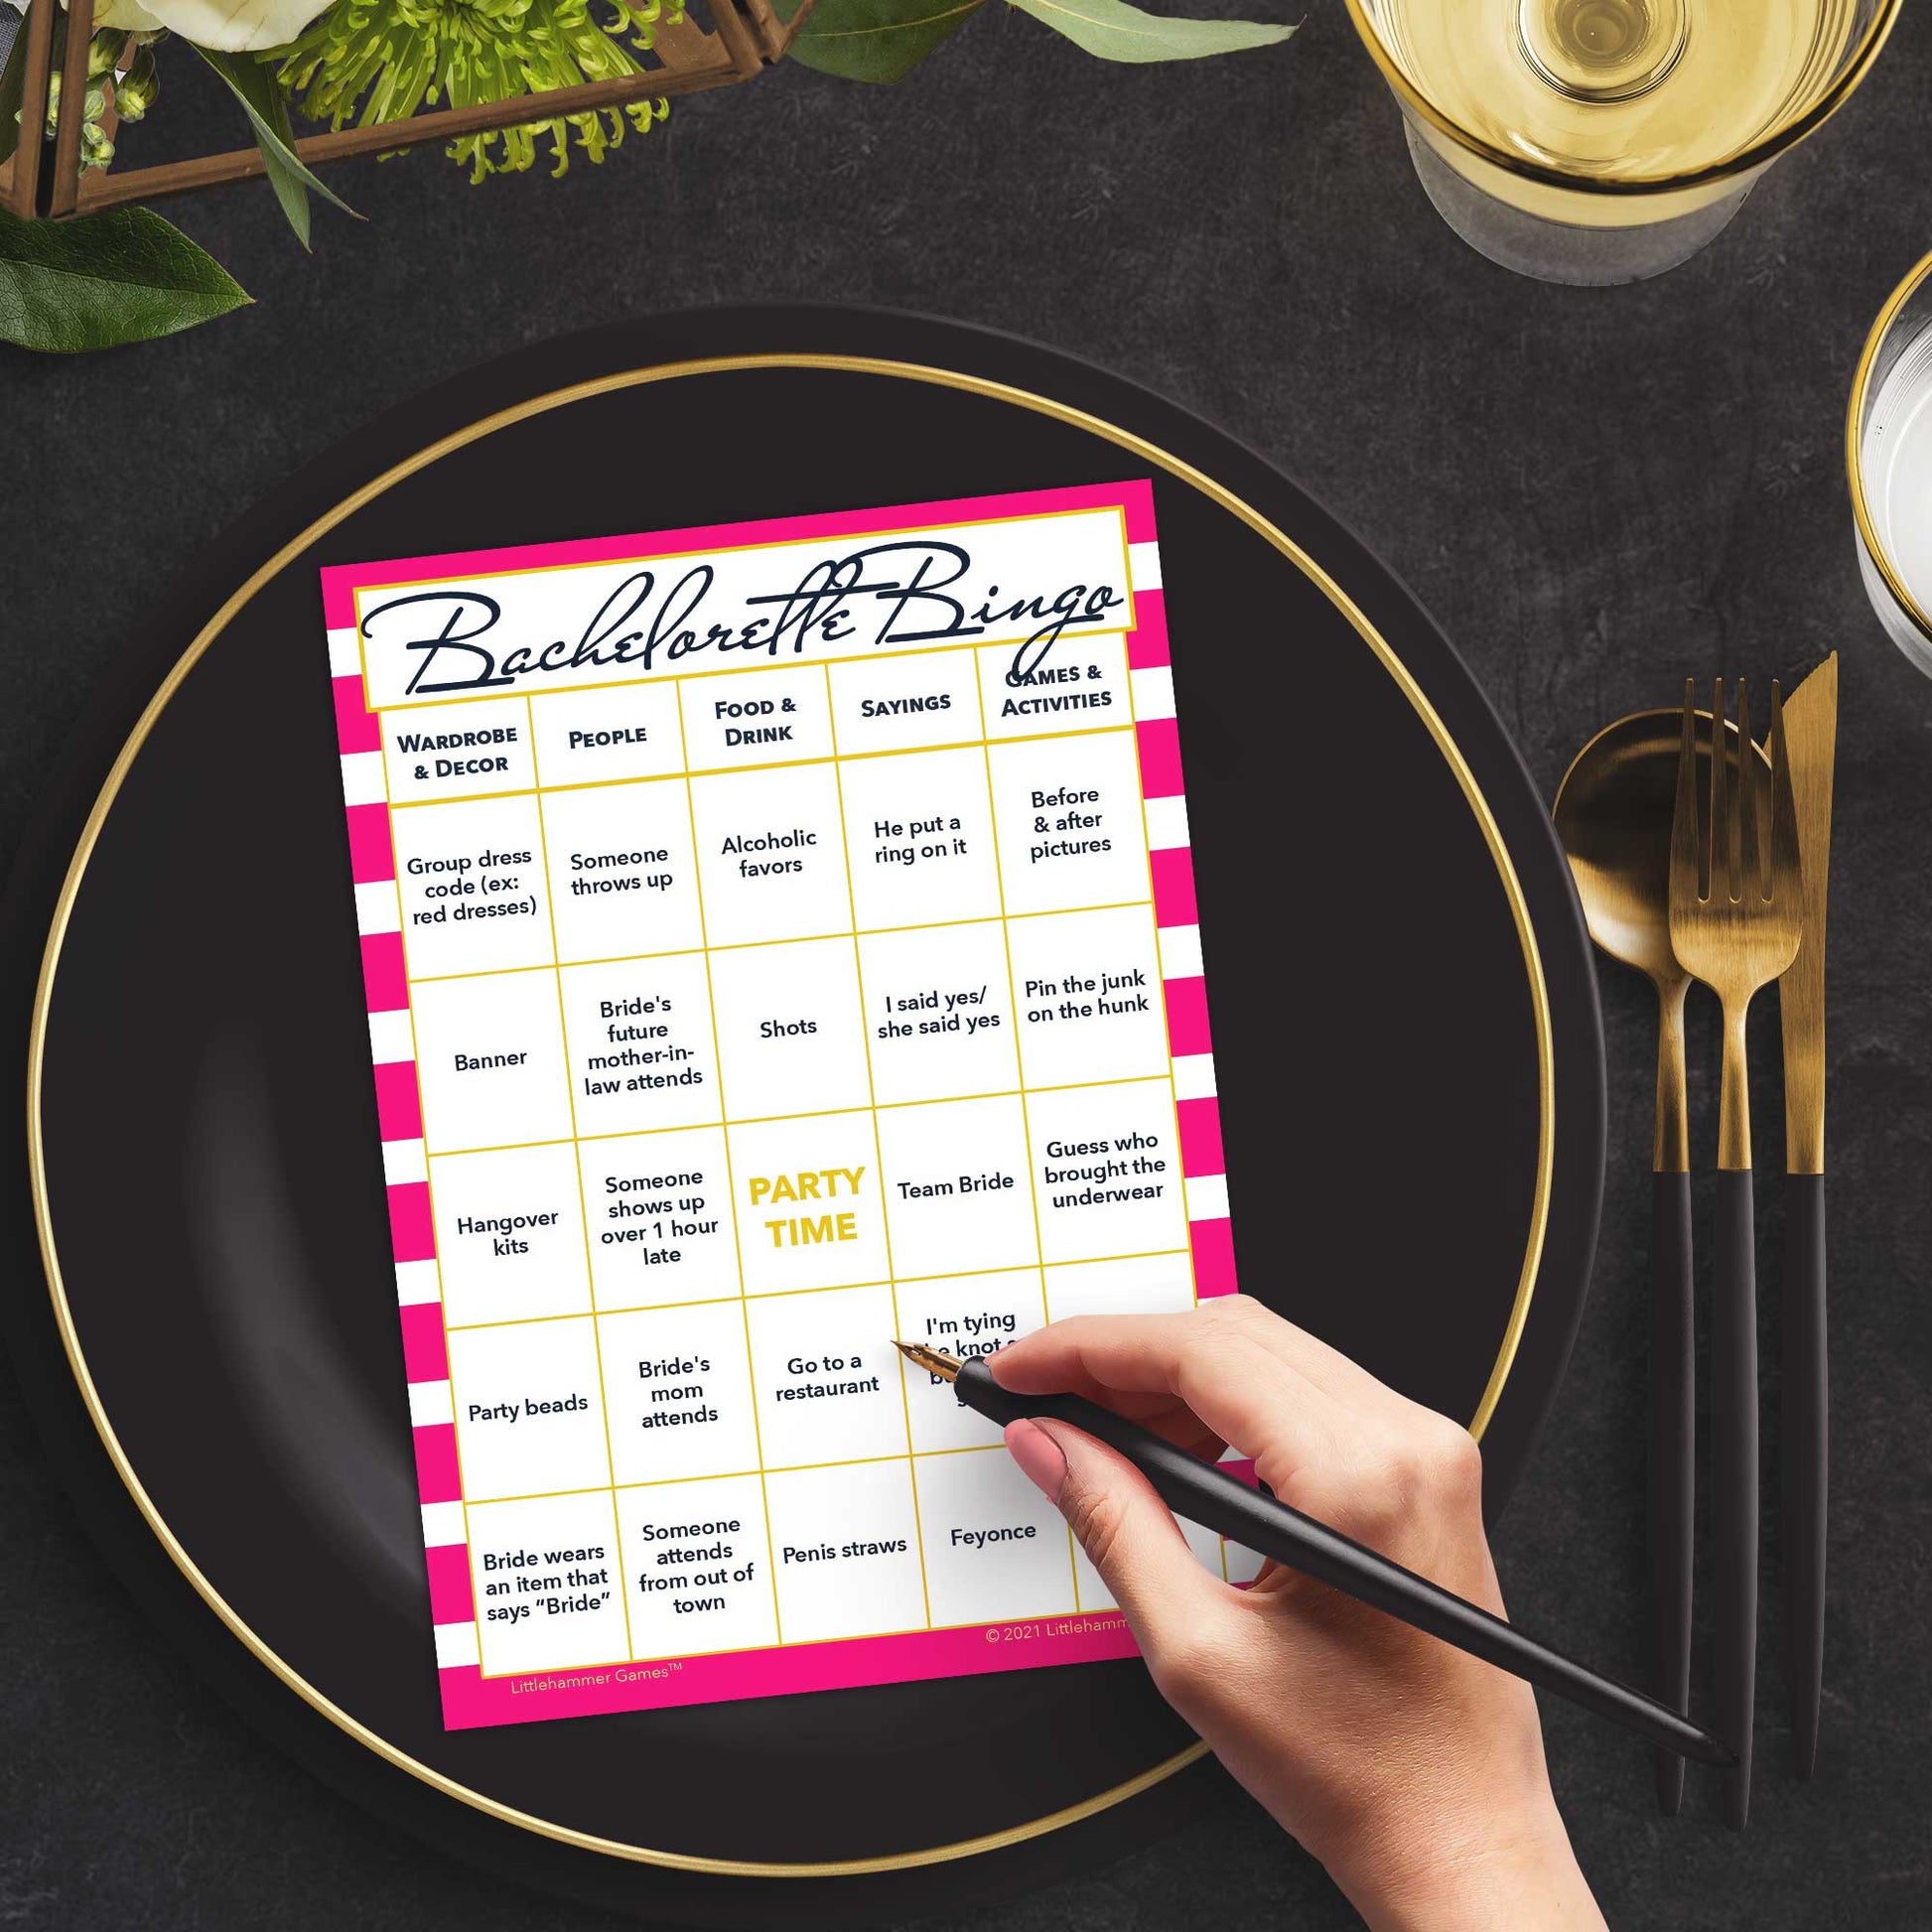 Woman with a pen sitting at a table with a hot pink-striped Bachelorette Bingo game card on a gold and black plate on a dark place setting